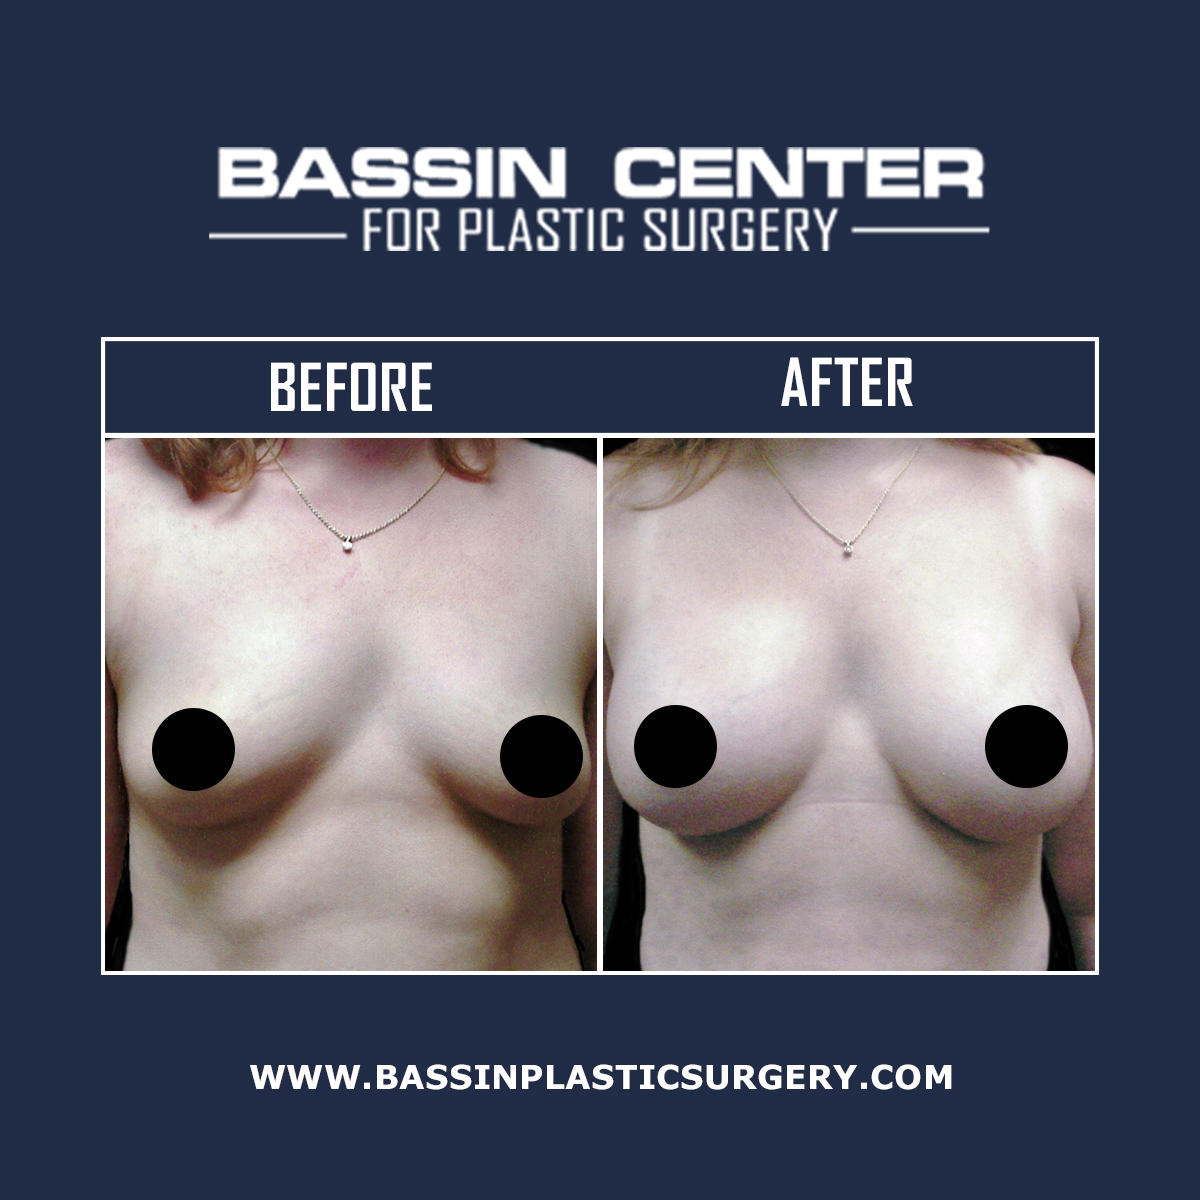 Breast enhancement can add lift, shape, and volume to the breasts. The Bassin Center for Plastic Surgery in Tampa creates a personalized treatment plan for each individual to achieve the most desirable results. We offer breast augmentation, breast lift, breast reduction, breast explant surgery, and more.